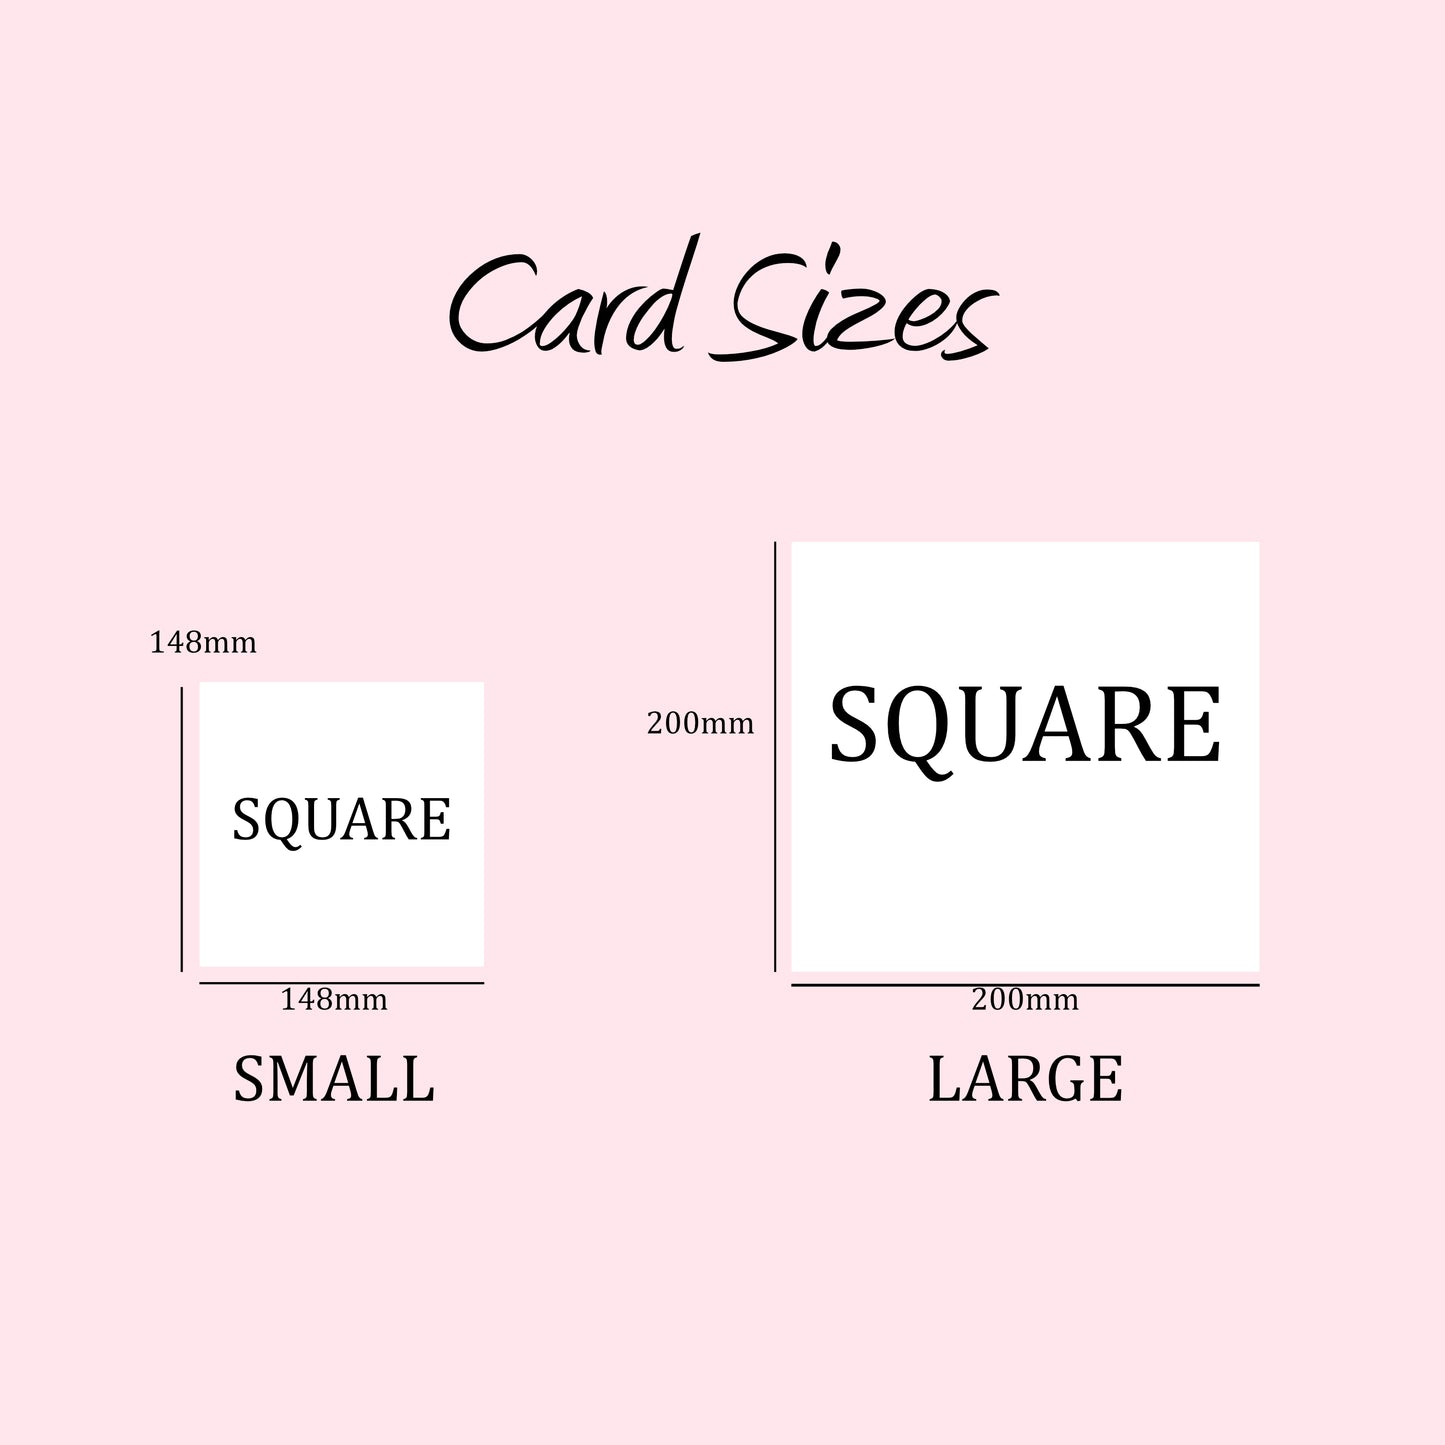 the size of a square and a smaller square